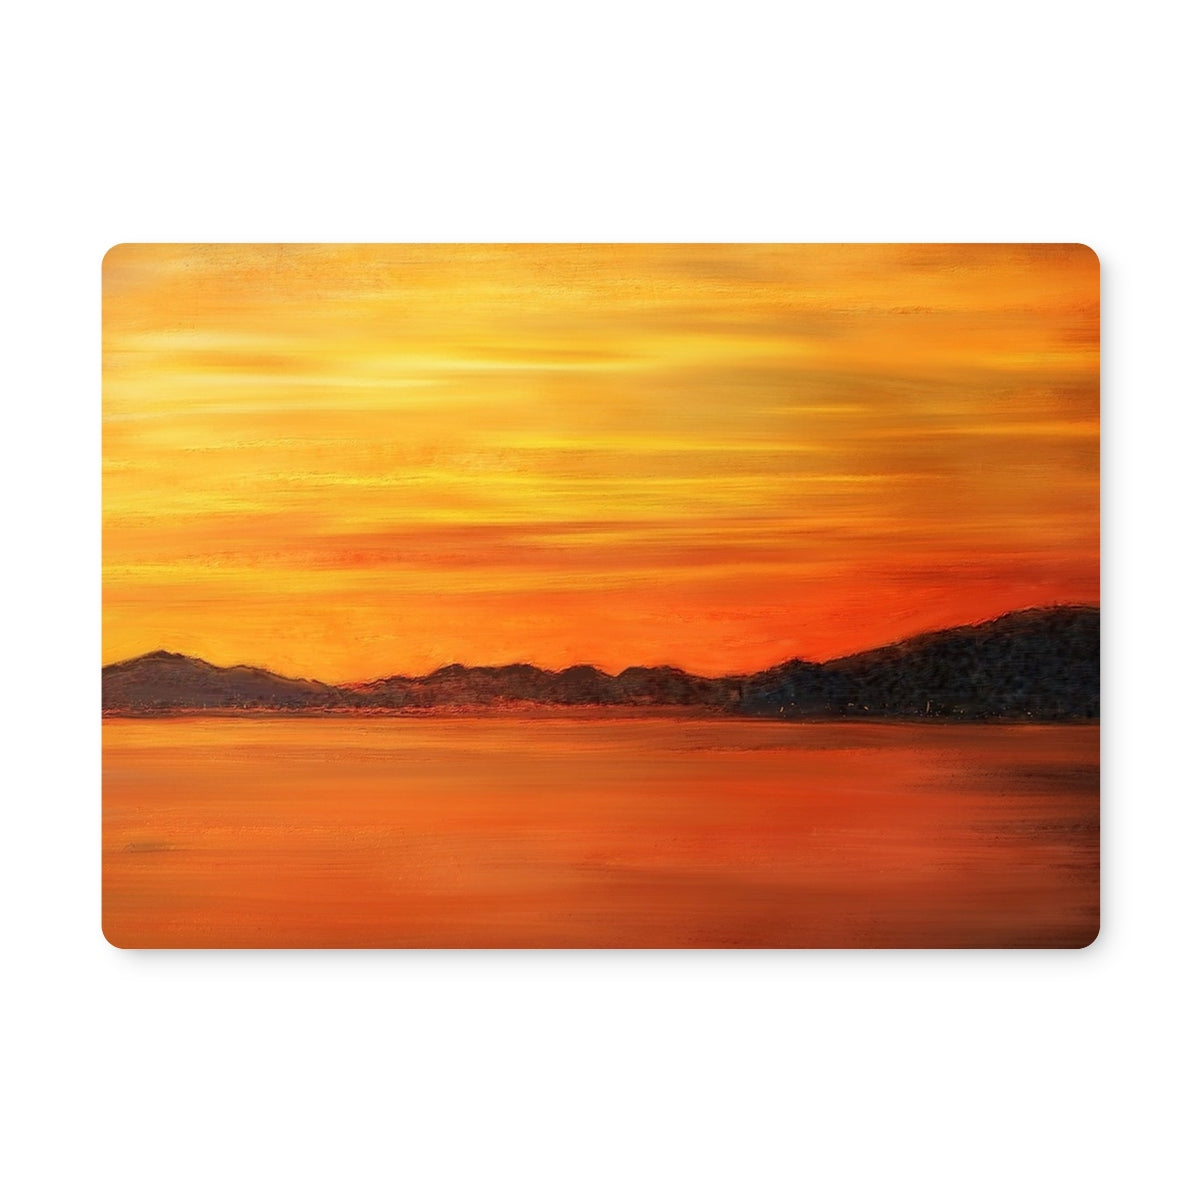 Loch Fyne Sunset Art Gifts Placemat-Placemats-Scottish Lochs & Mountains Art Gallery-Single Placemat-Paintings, Prints, Homeware, Art Gifts From Scotland By Scottish Artist Kevin Hunter